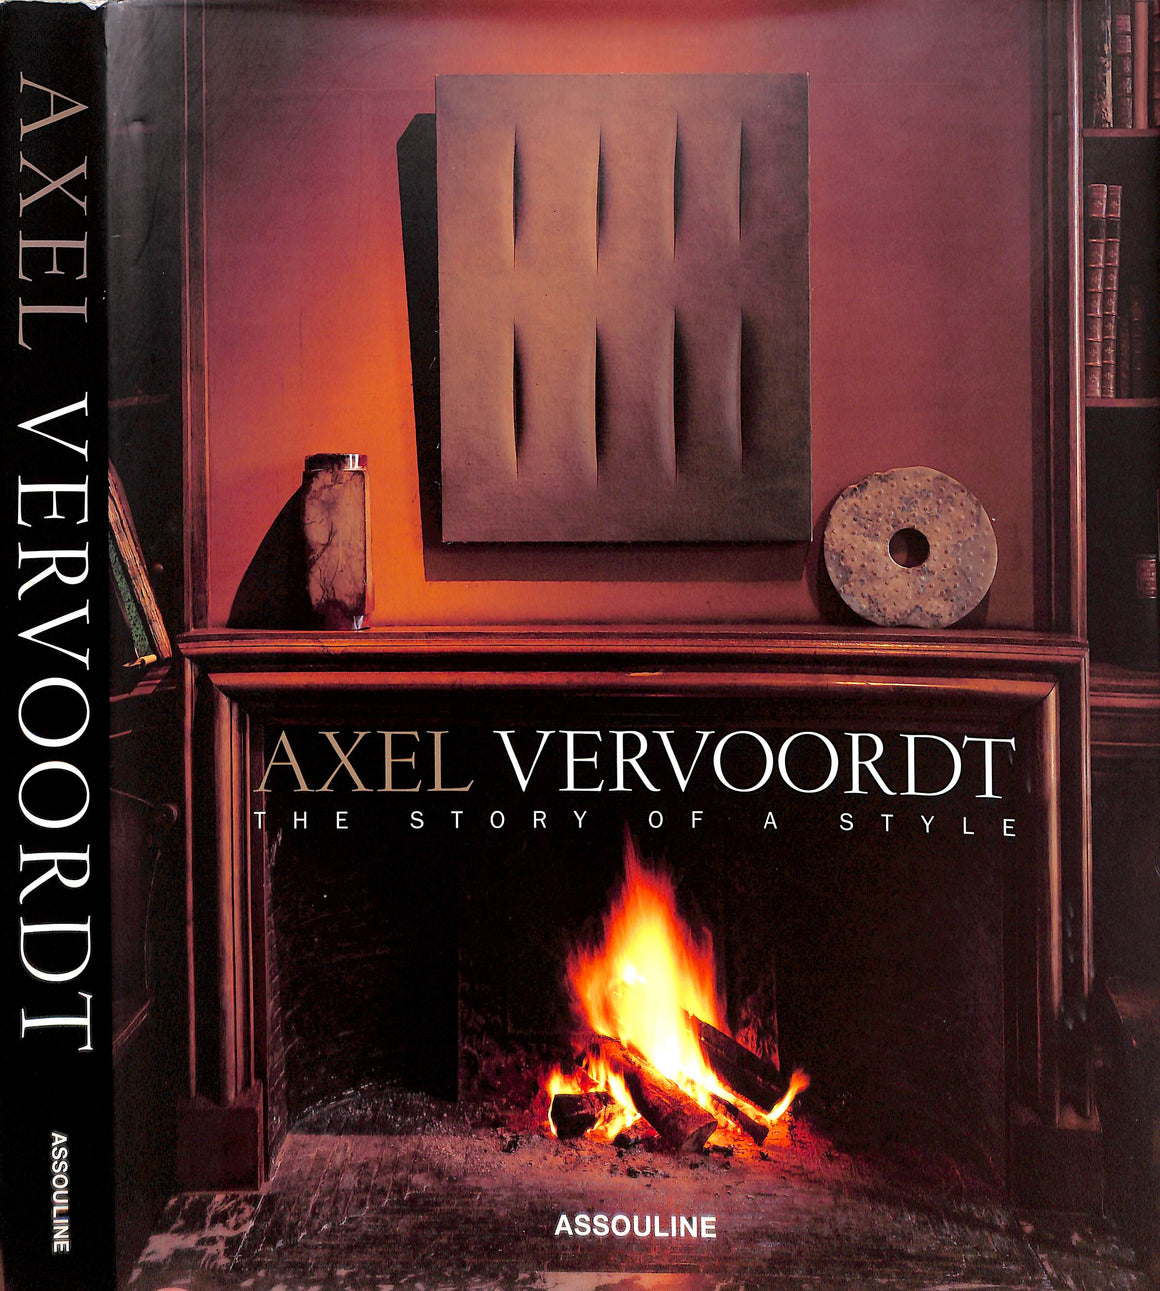 "Axel Vervoordt The Story Of A Style" 2001 ETHERINGTON-SMITH, Meredith [text by]